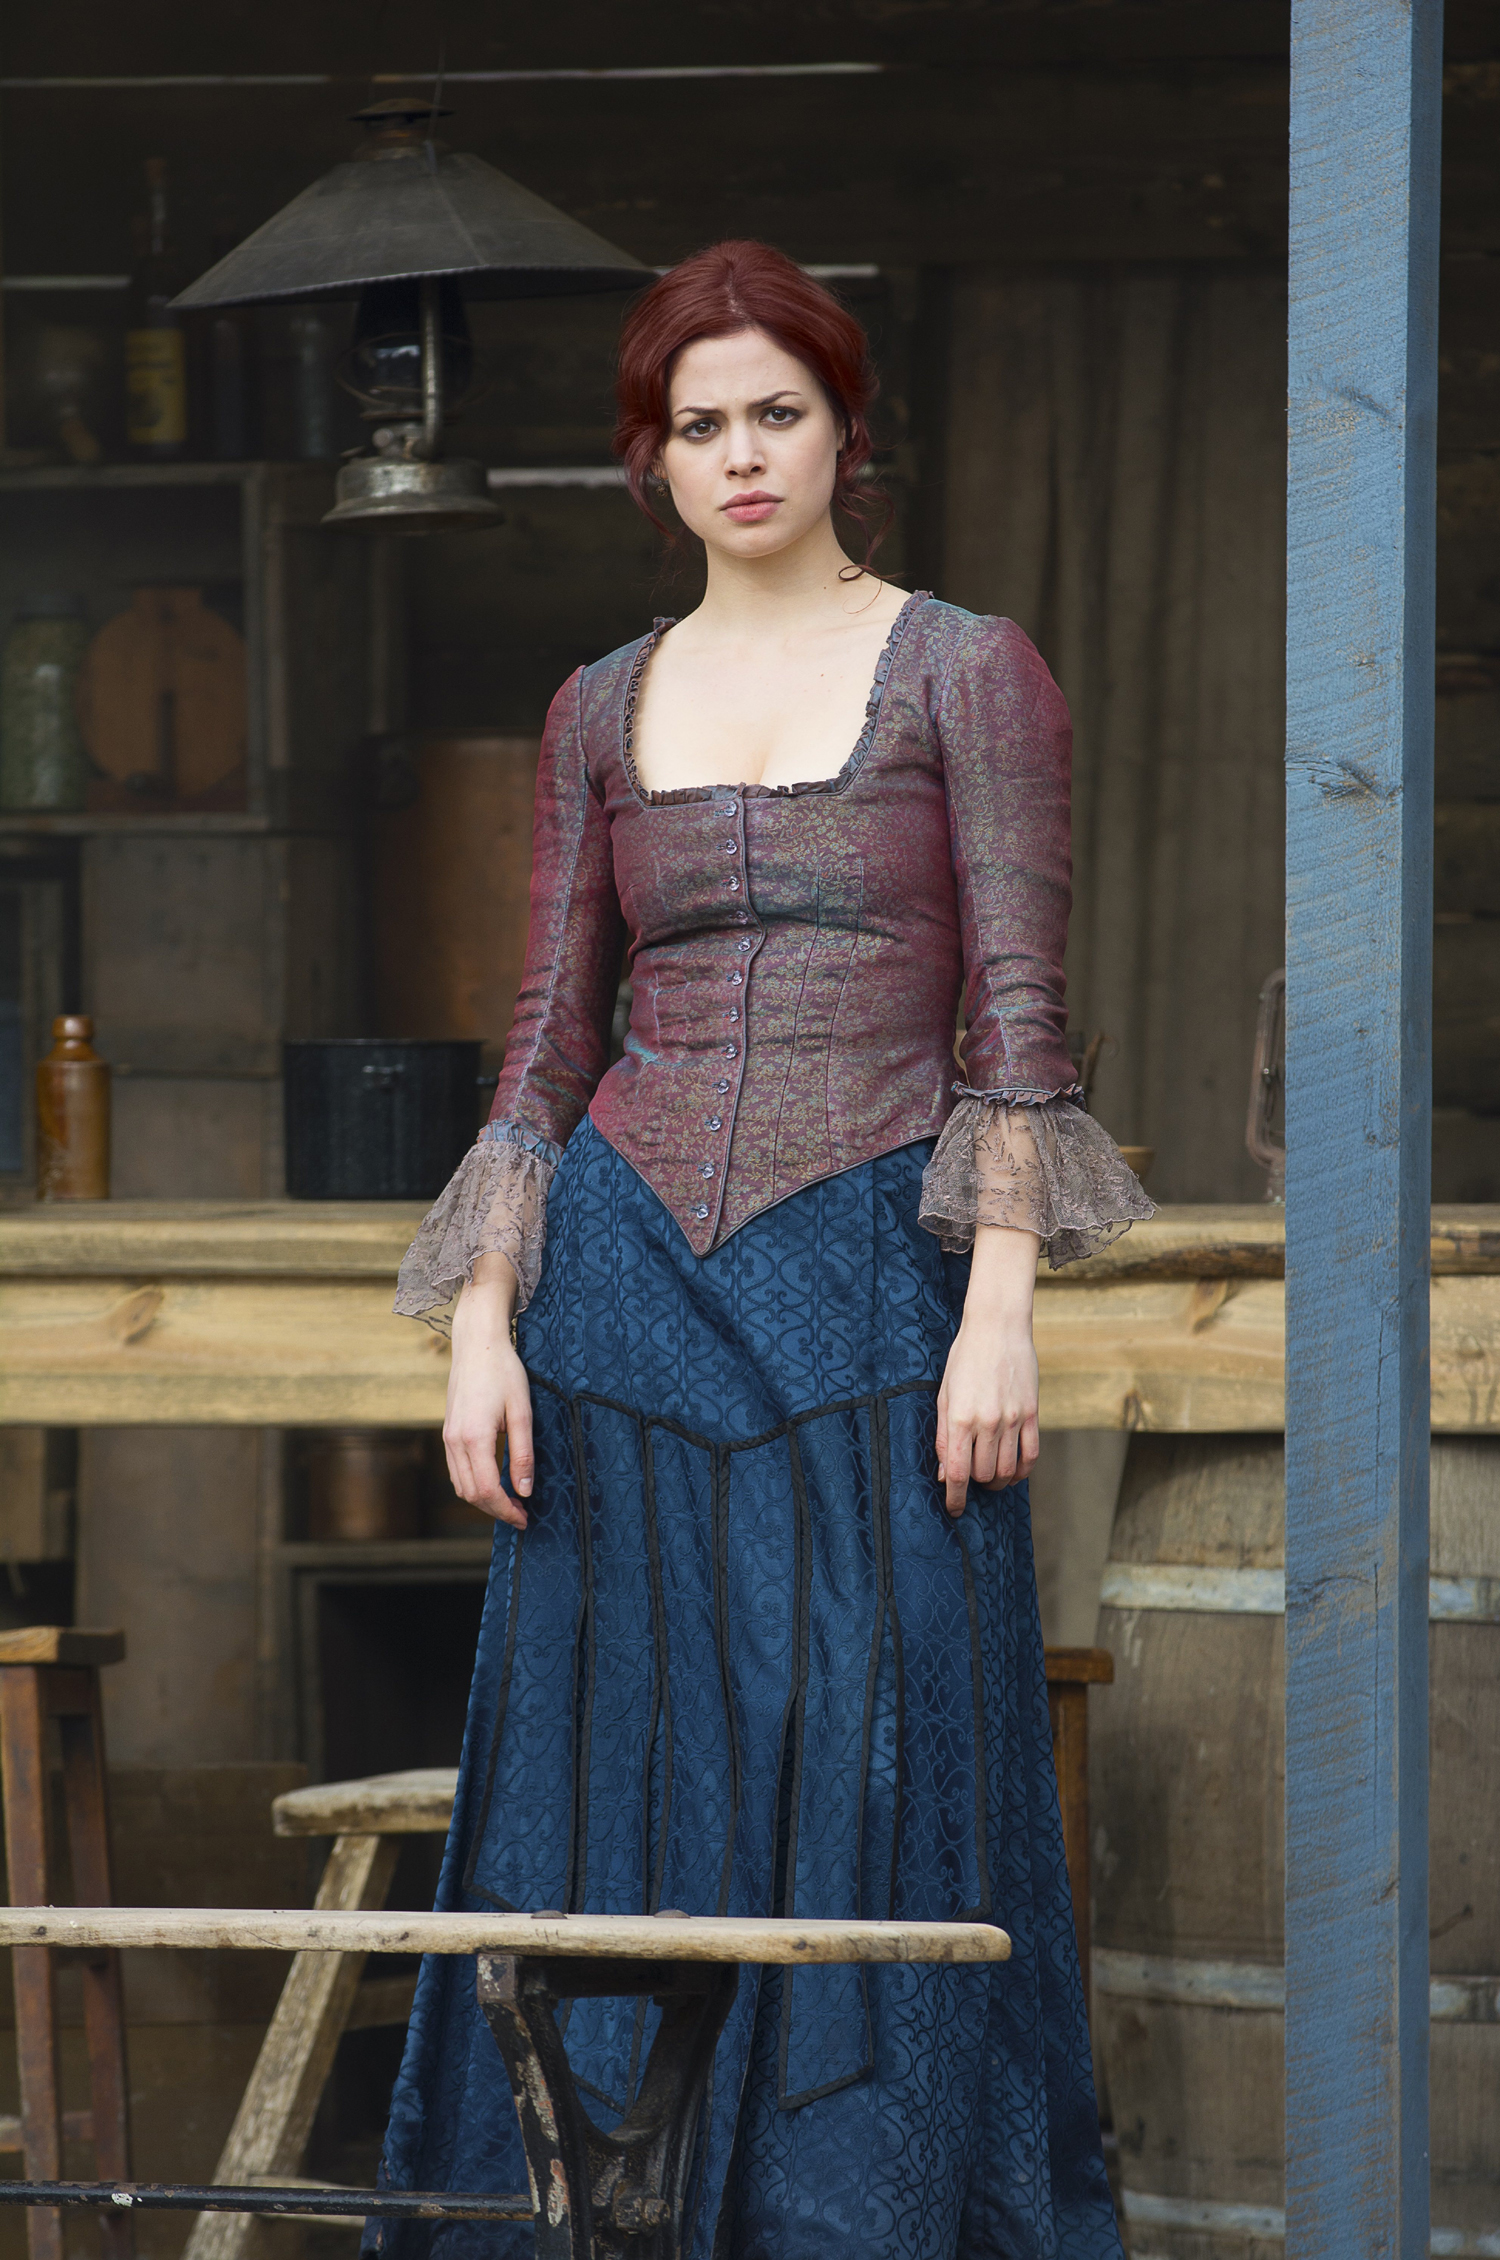 Klondike Image Conor Leslie As Sabine HD Wallpaper And Background